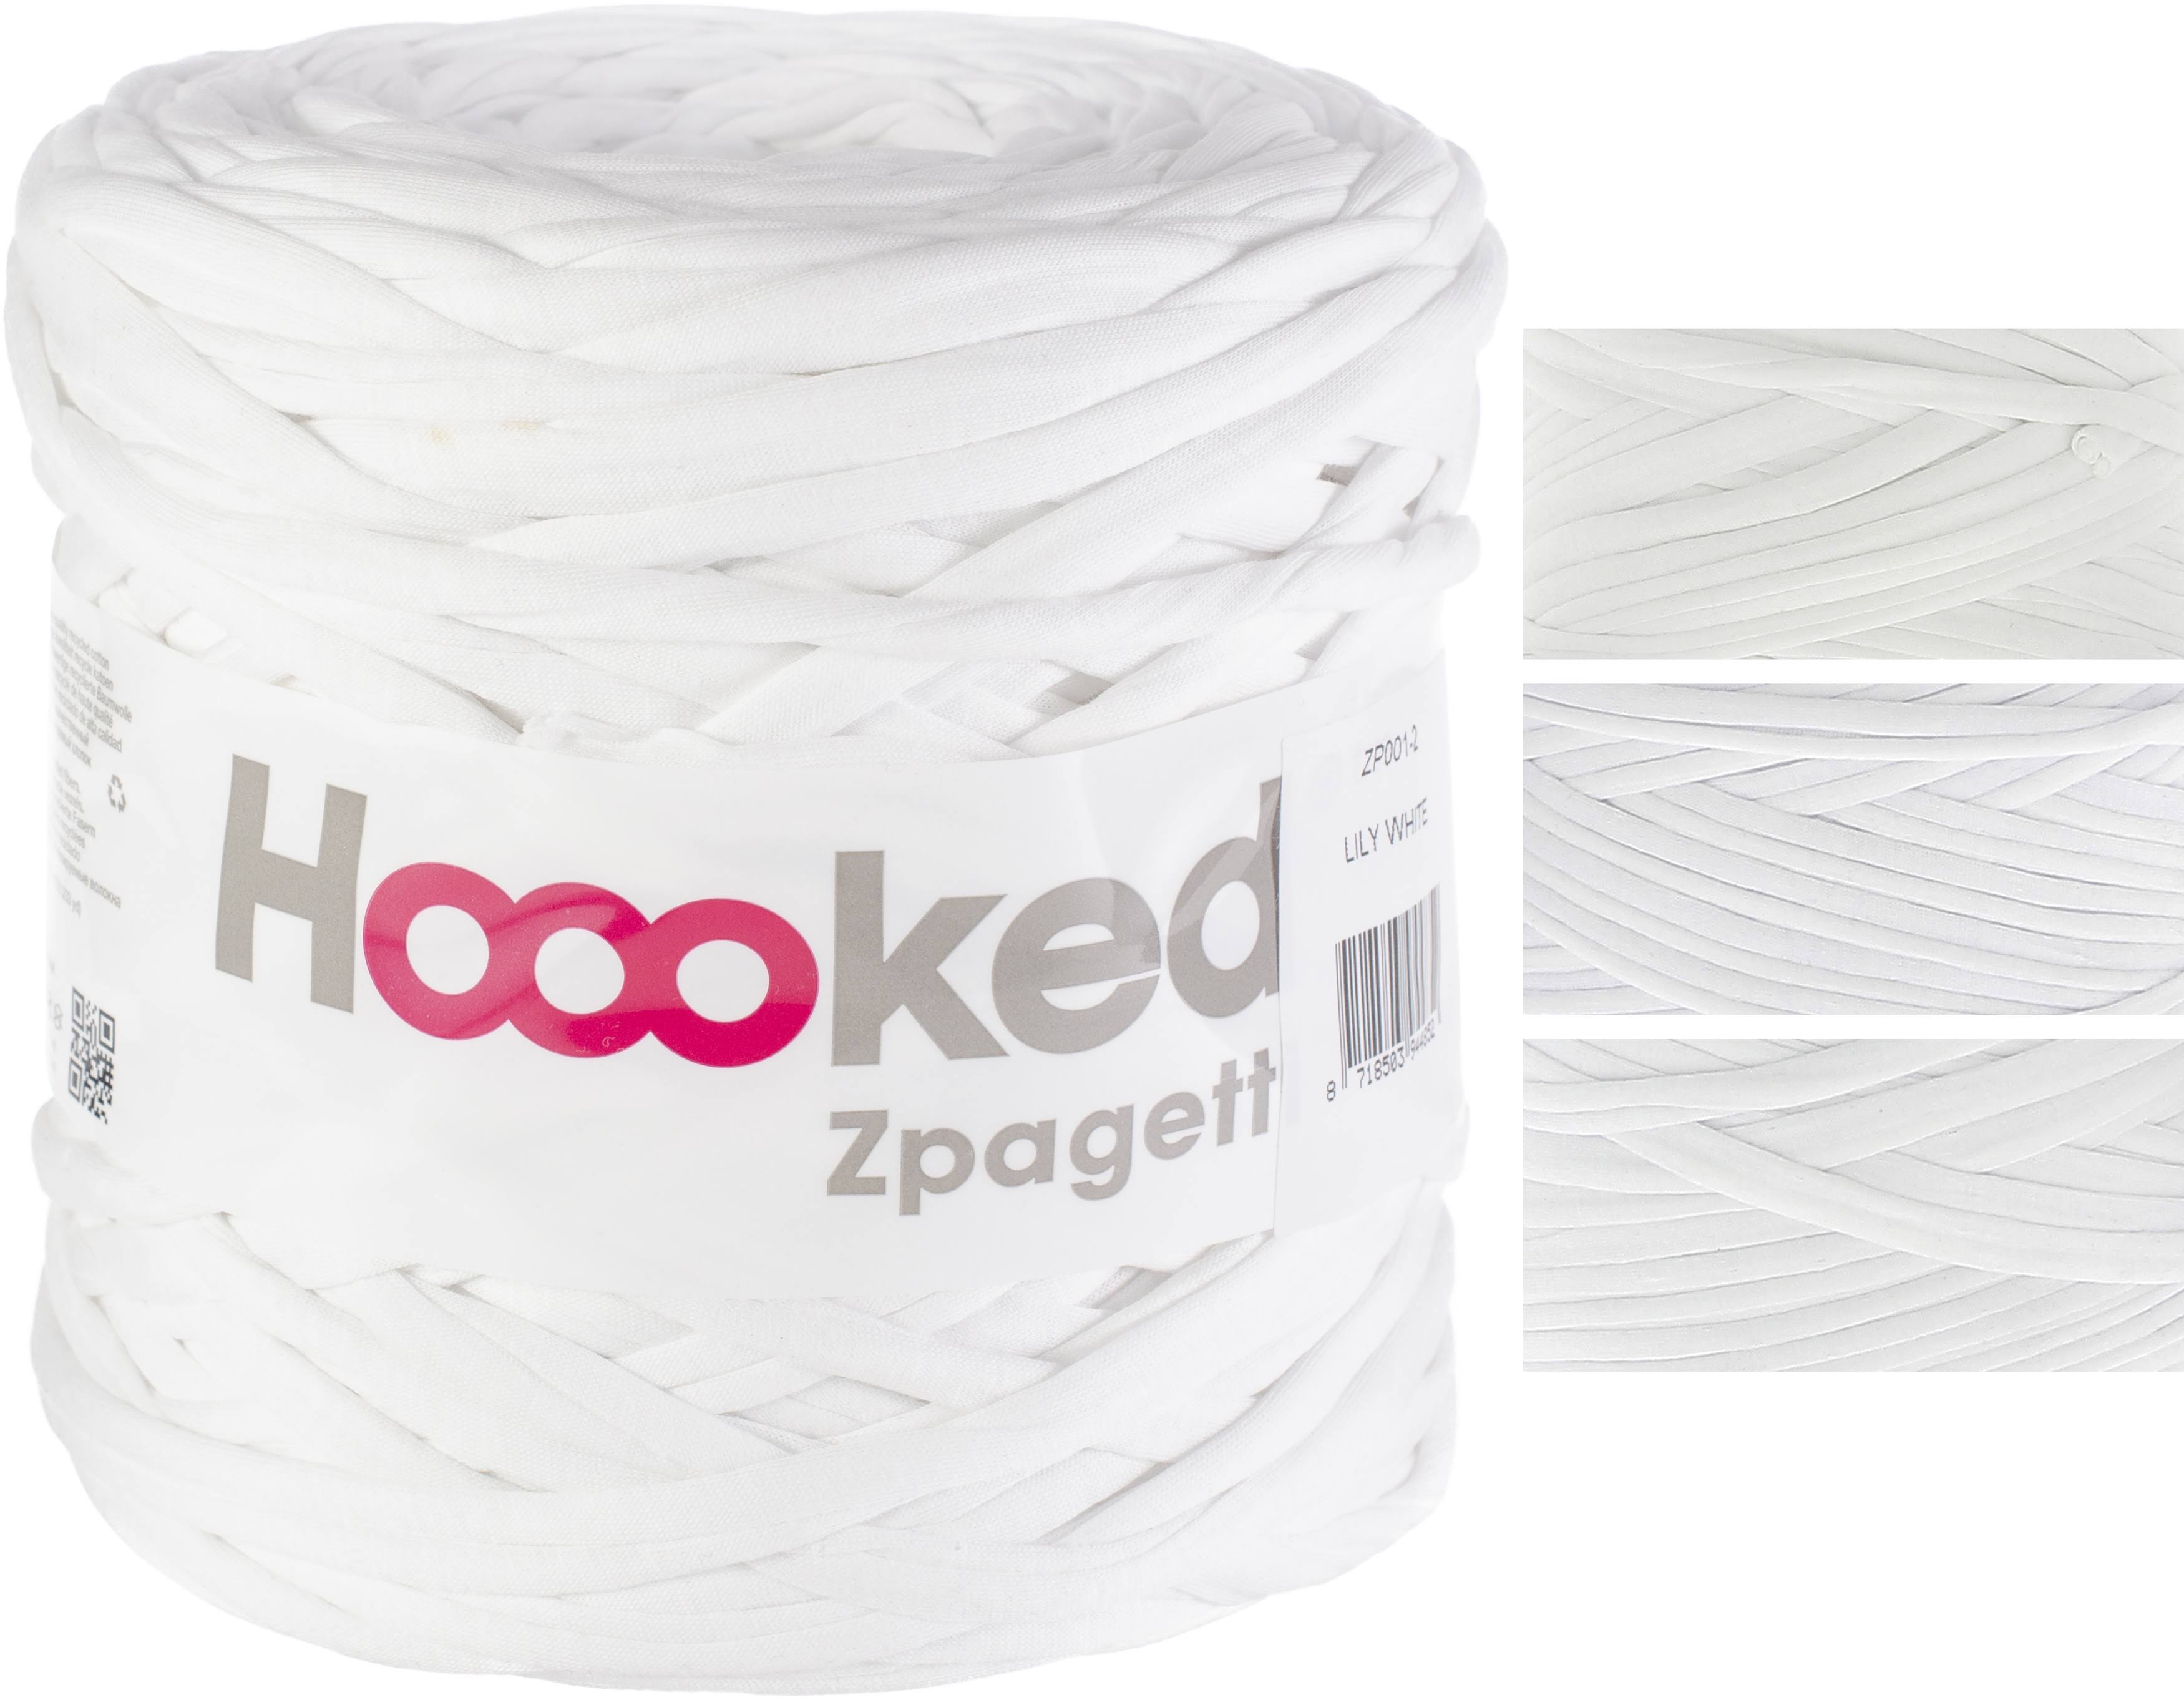 Hoooked Lily White Zpagetti Yarn One-Size